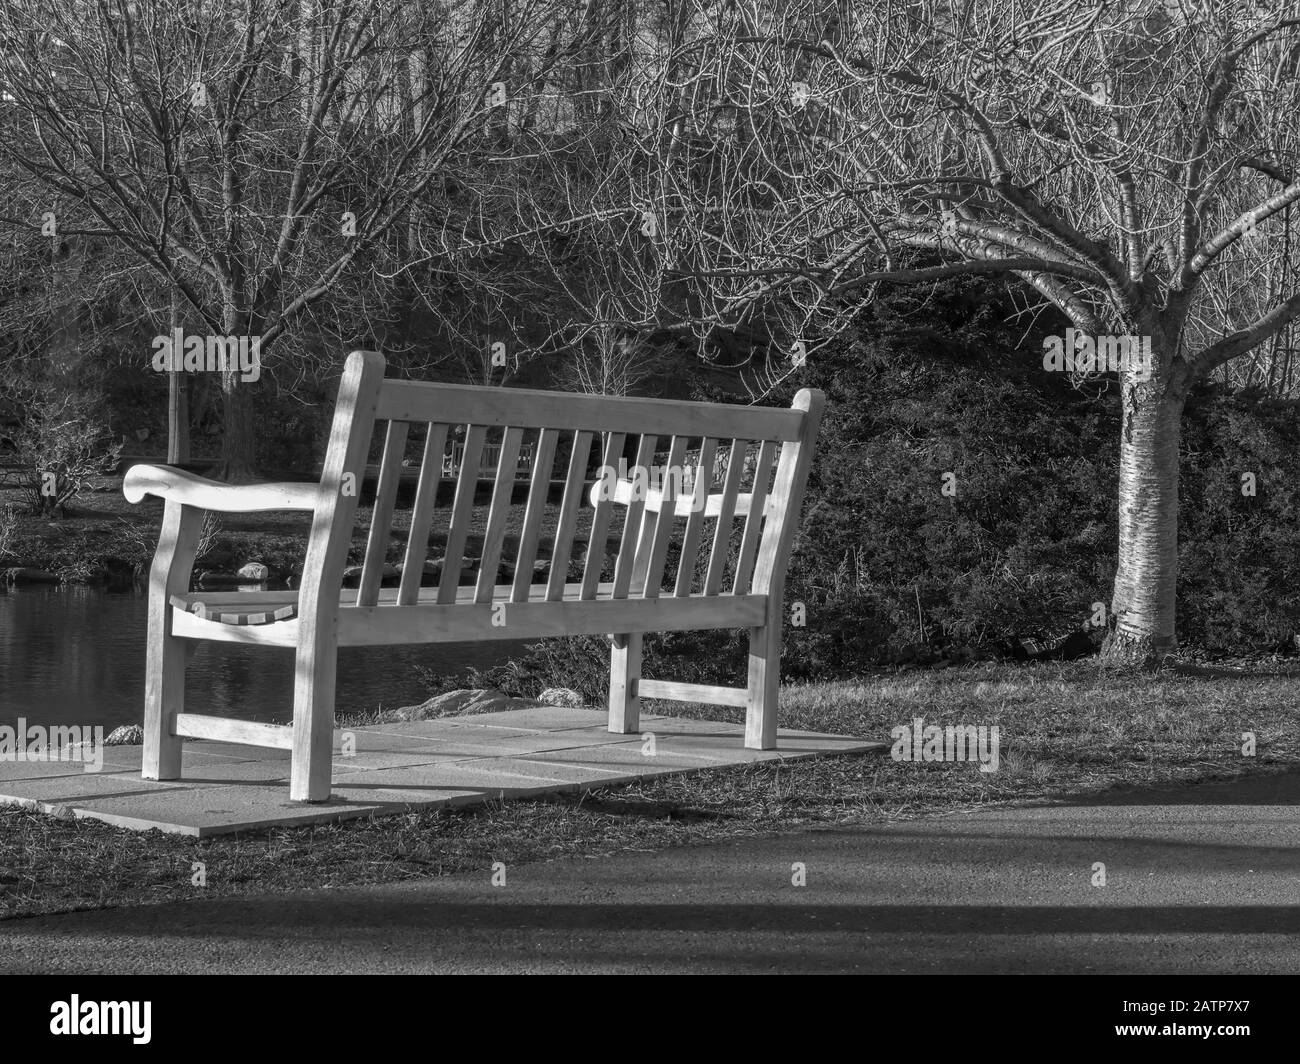 Lone park bench black and white Stock Photo